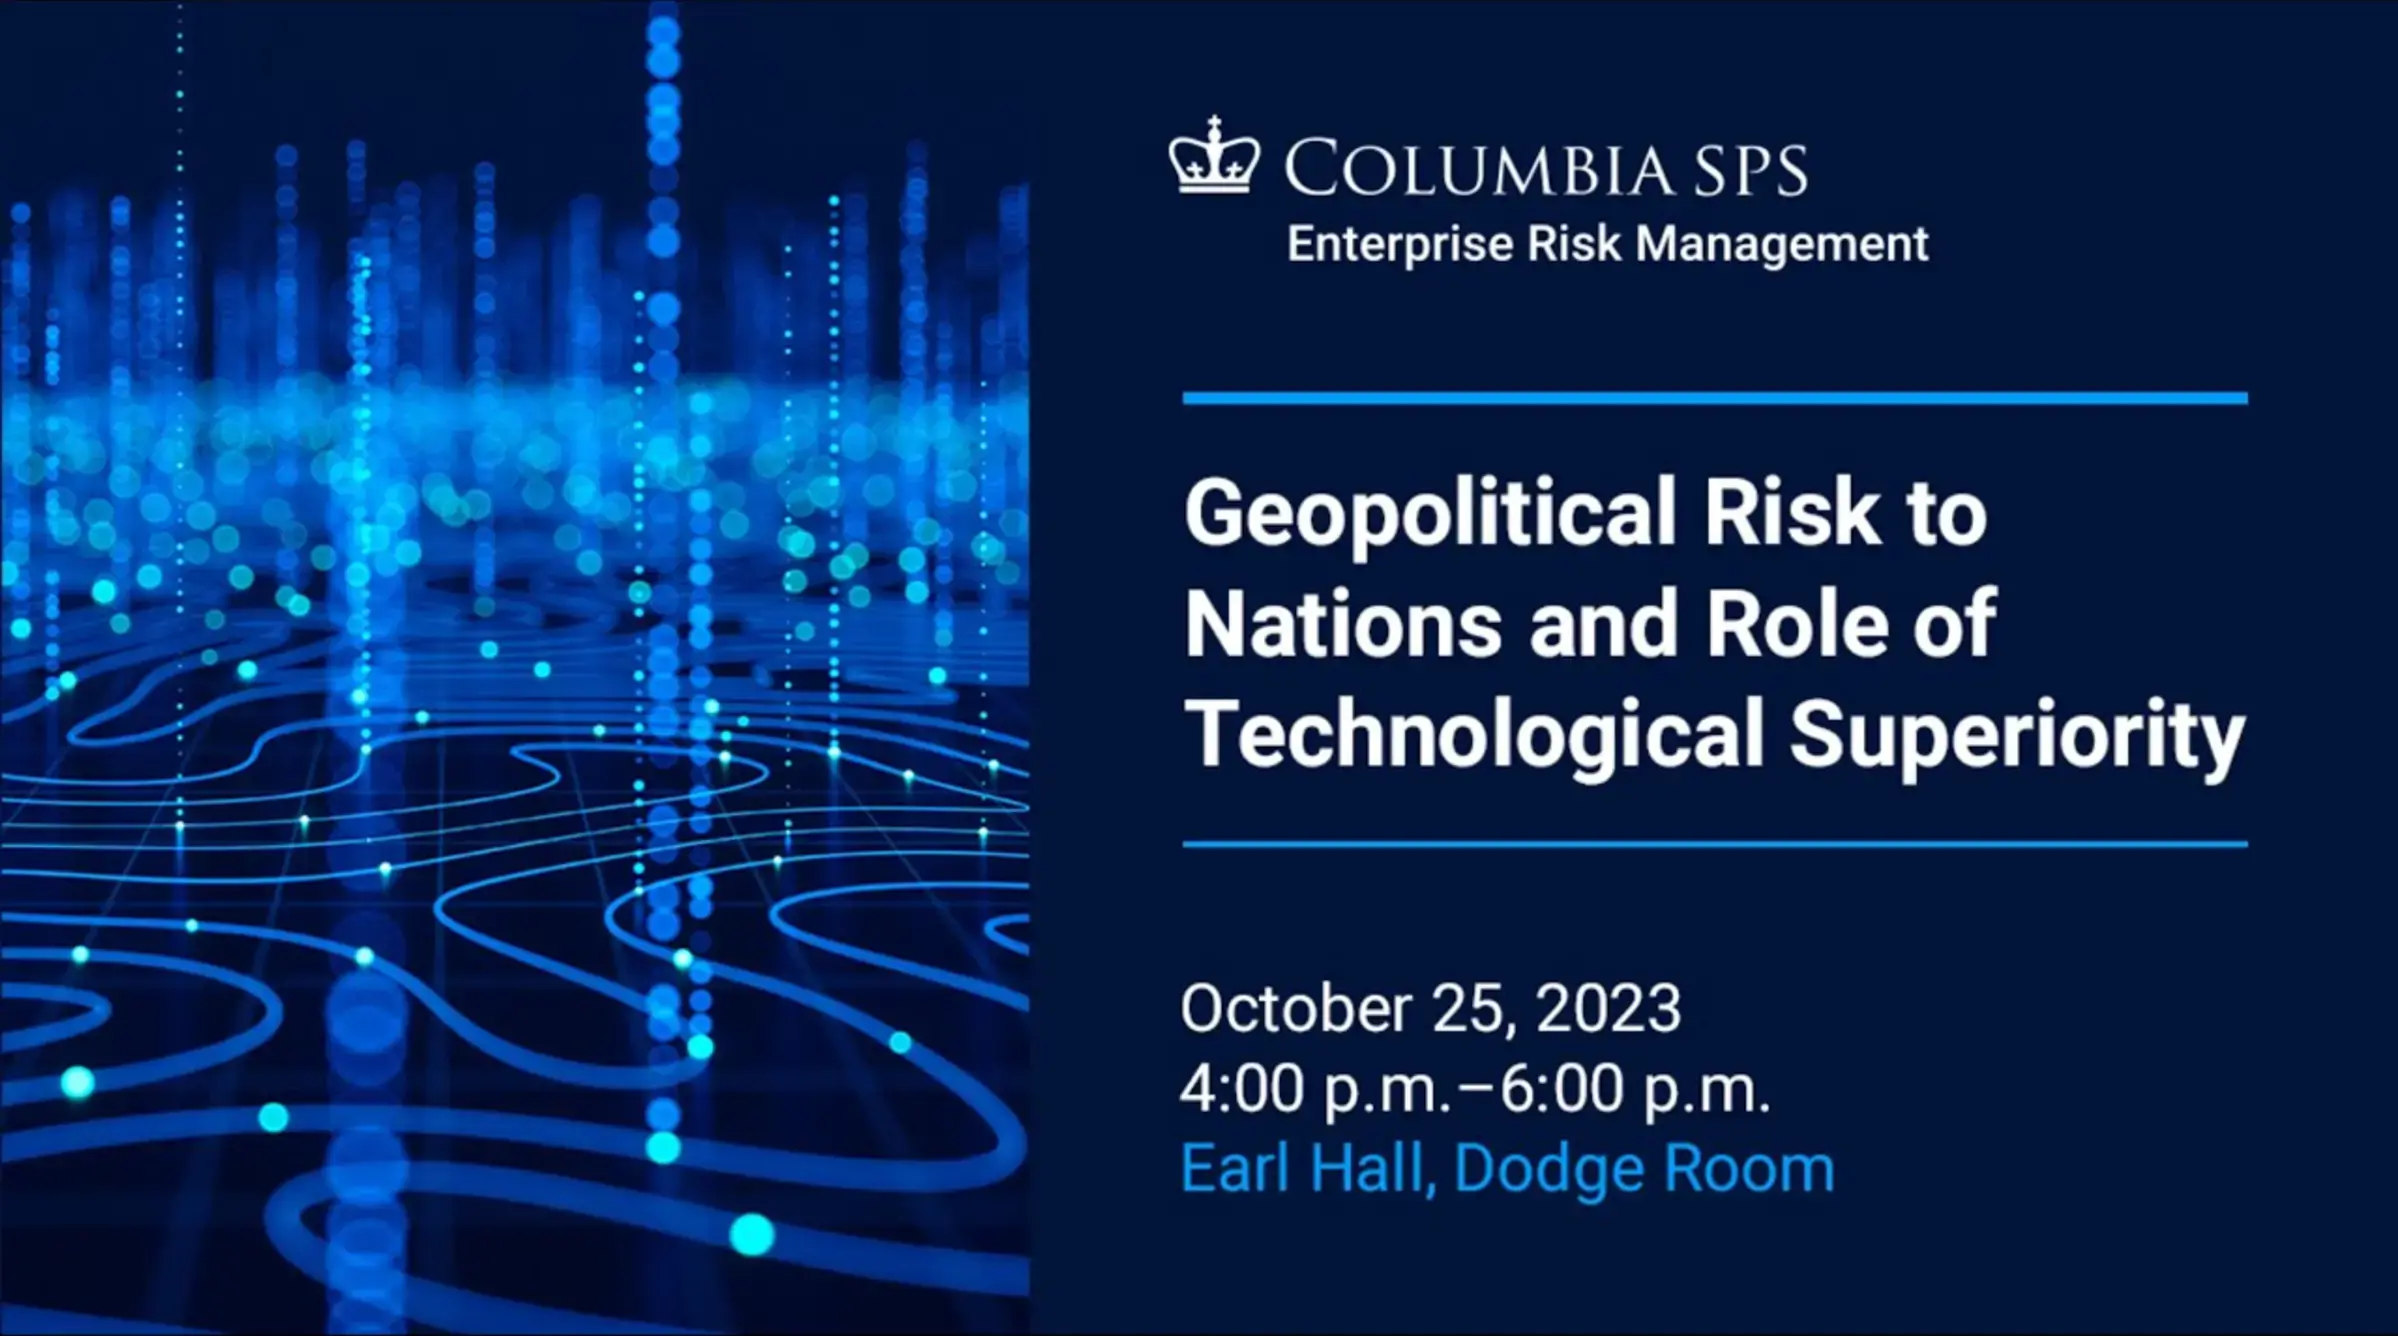 Geopolitical Risk to Nations and Role of Technological Superiority